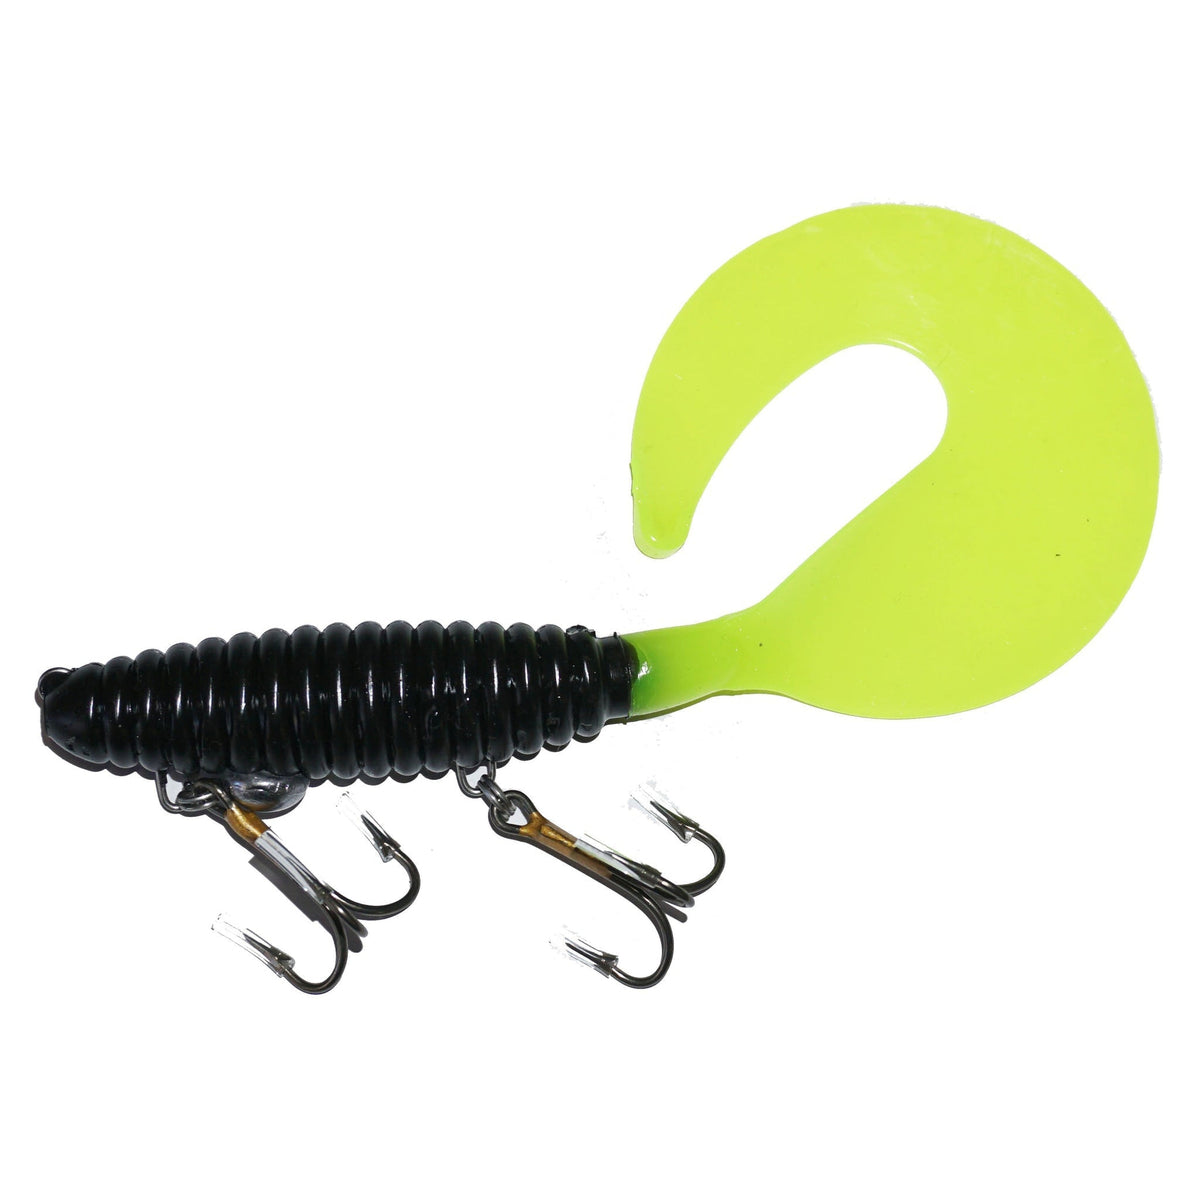 View of Rubber Whale Tail Plastics 11" Black / Chartreuse Tail available at EZOKO Pike and Musky Shop